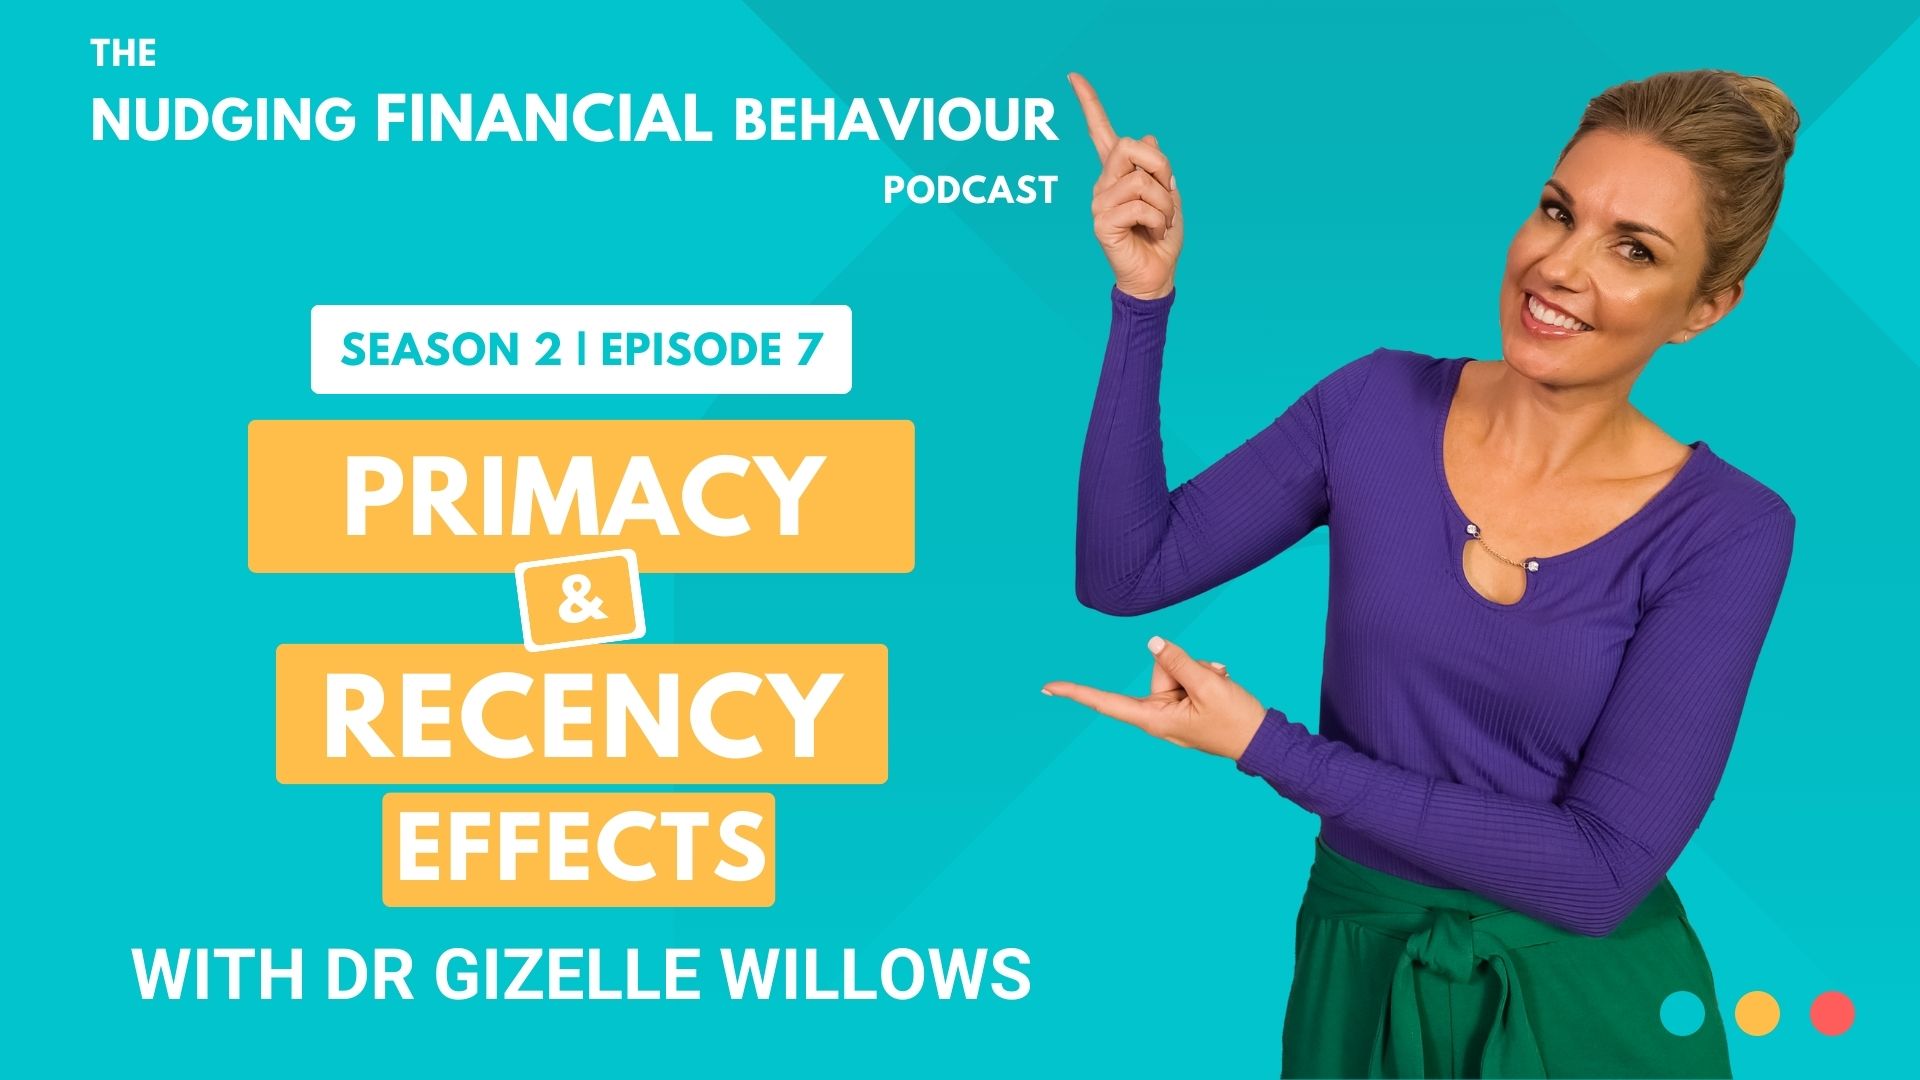 Primacy and recency effects: Nudging Financial Behaviour podcast